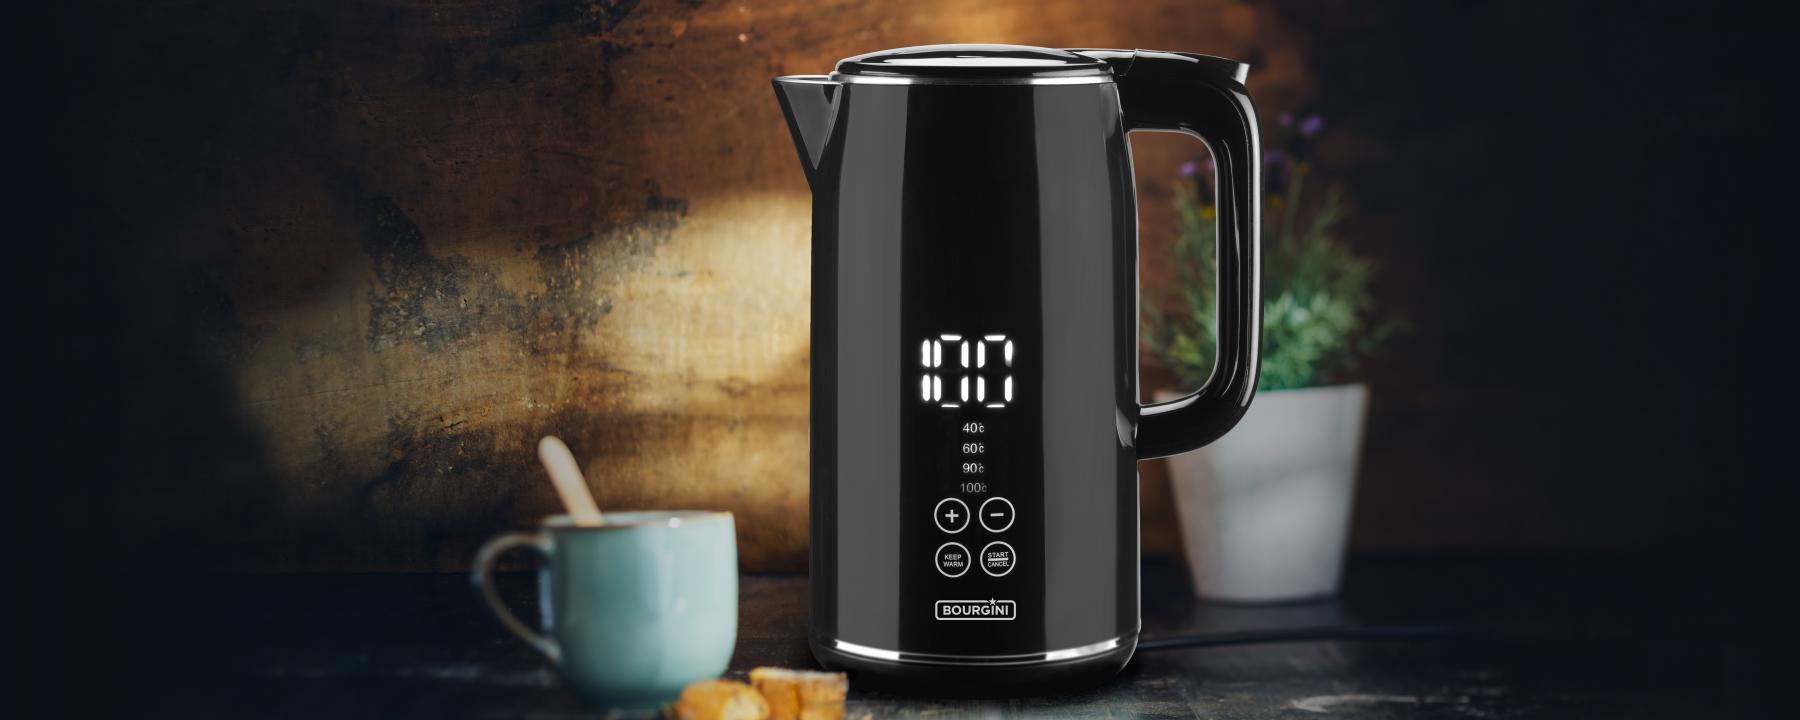 COOL TOUCH DIGITAL KETTLE 1.7L